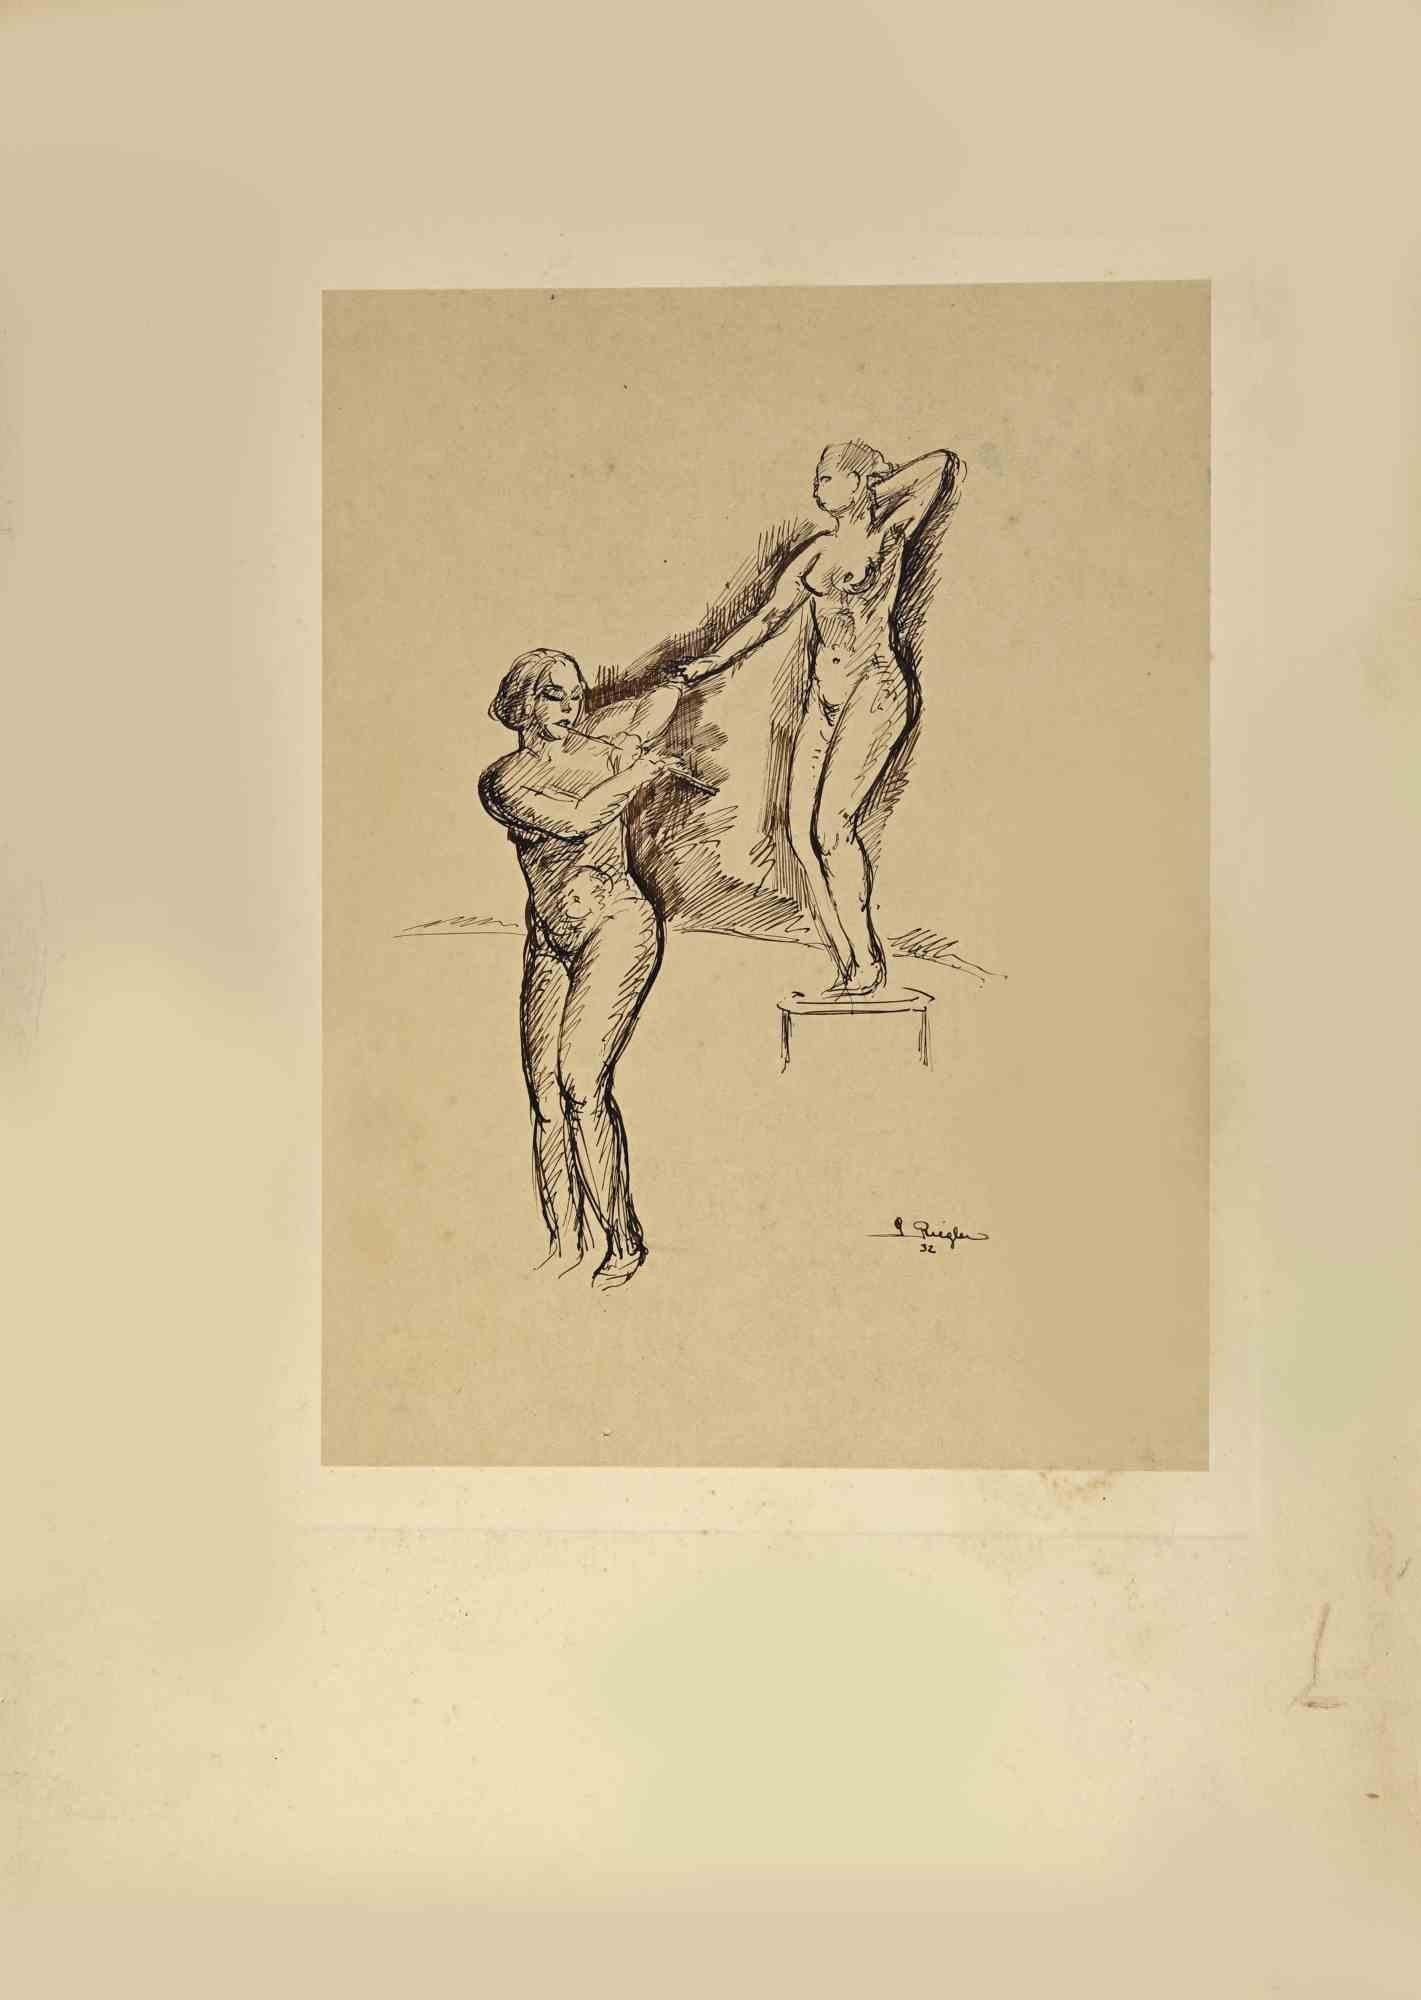 Women Nudes is an Artwork  realized by  the Artist G. Riegler.

Drawing in ink on paper, Hand-signed and dated by the artist on the lower right corner.

The artwork is glued on cardboard. Total dimensions: 48 x 33 cm.